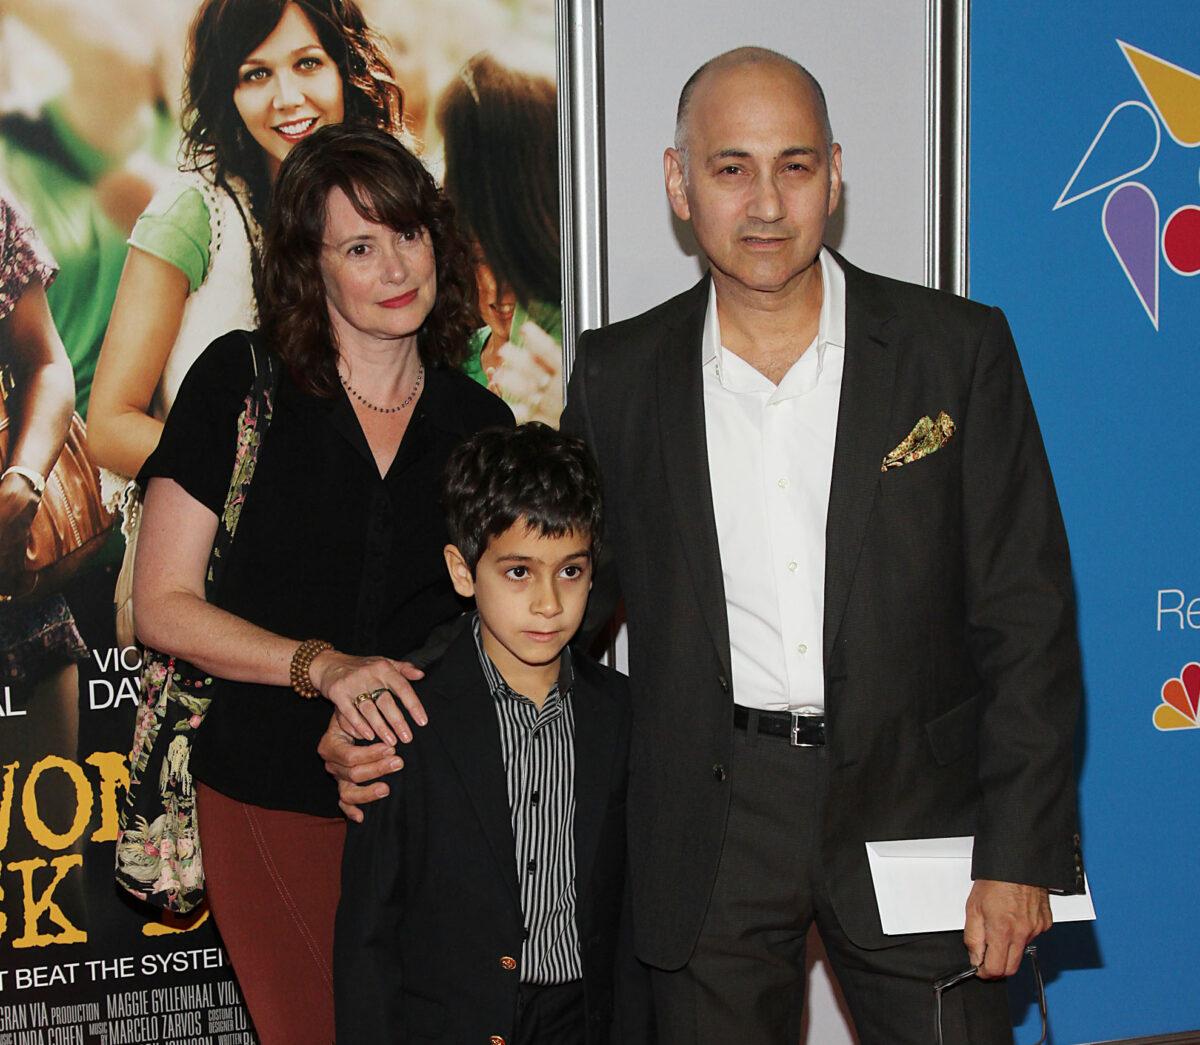 Ned Eisenberg attends the "Won't Back Down" New York Premiere with his family at Ziegfeld Theater in N.Y.C. on Sept. 23, 2012. (Rob Kim/Getty Images)